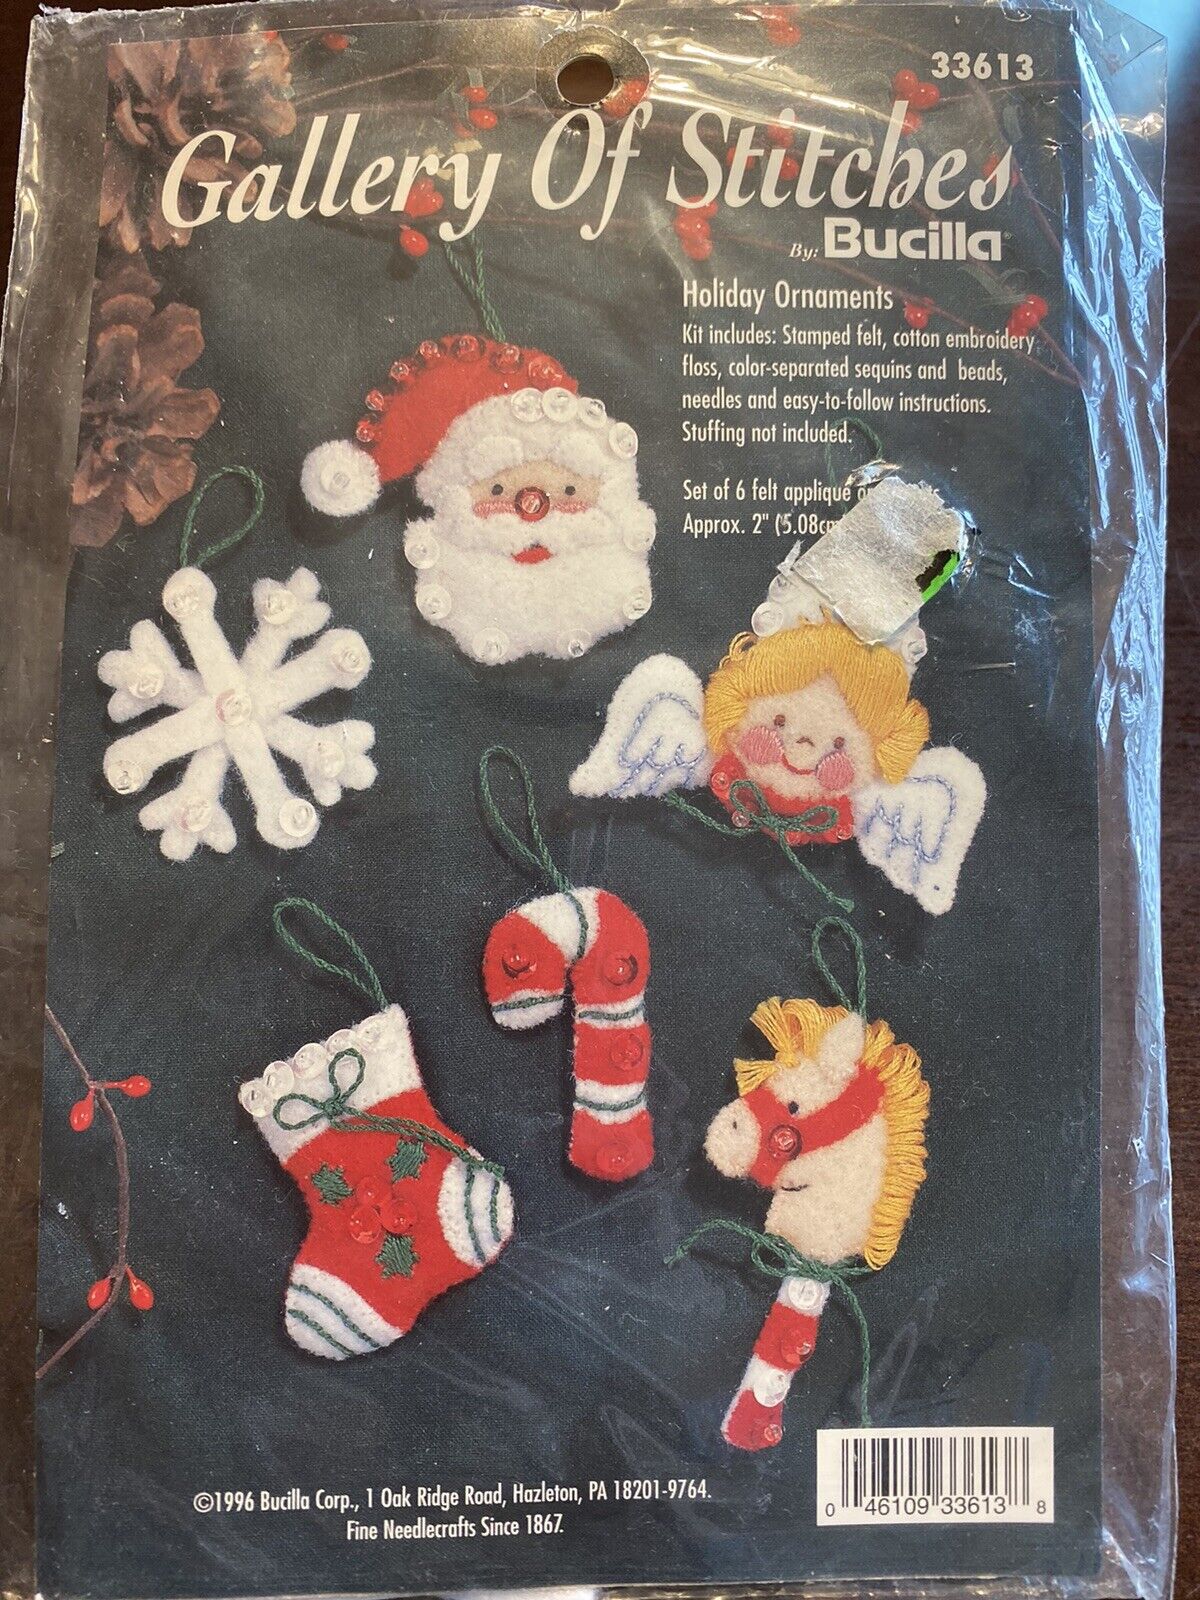 1996 Bucilla GALLERY OF STITCHES Holiday Ornaments - Kit 33613 - Set of 6 - New